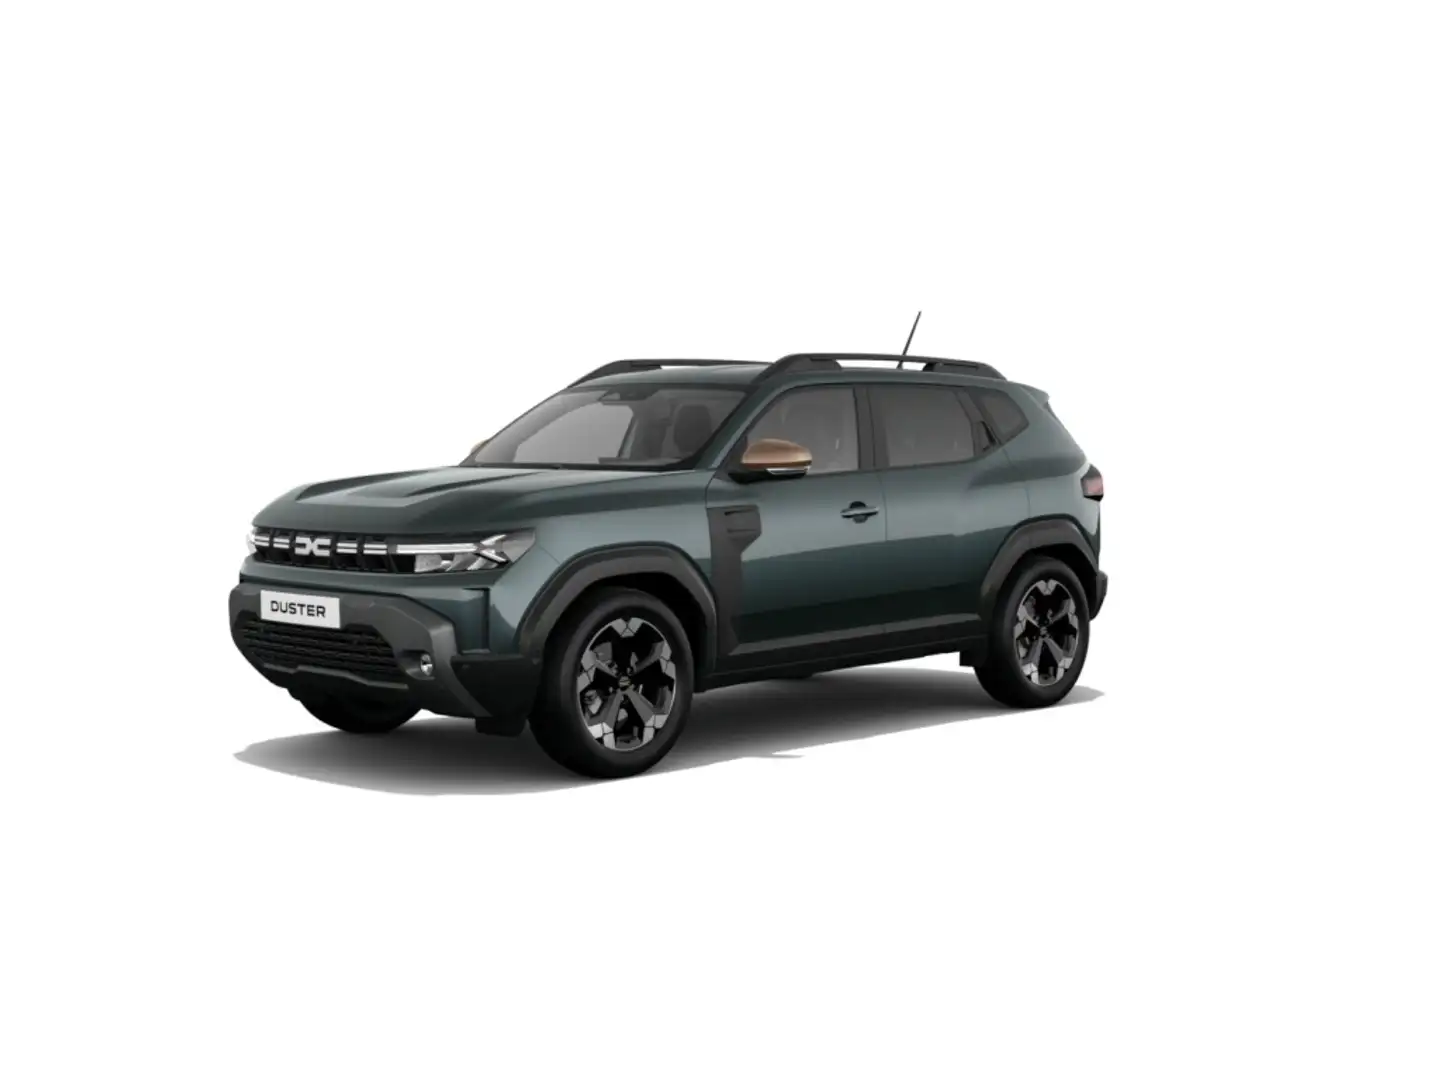 Dacia Duster 1.2 TCe Extreme 4x4 96kW 48v Verde - 1